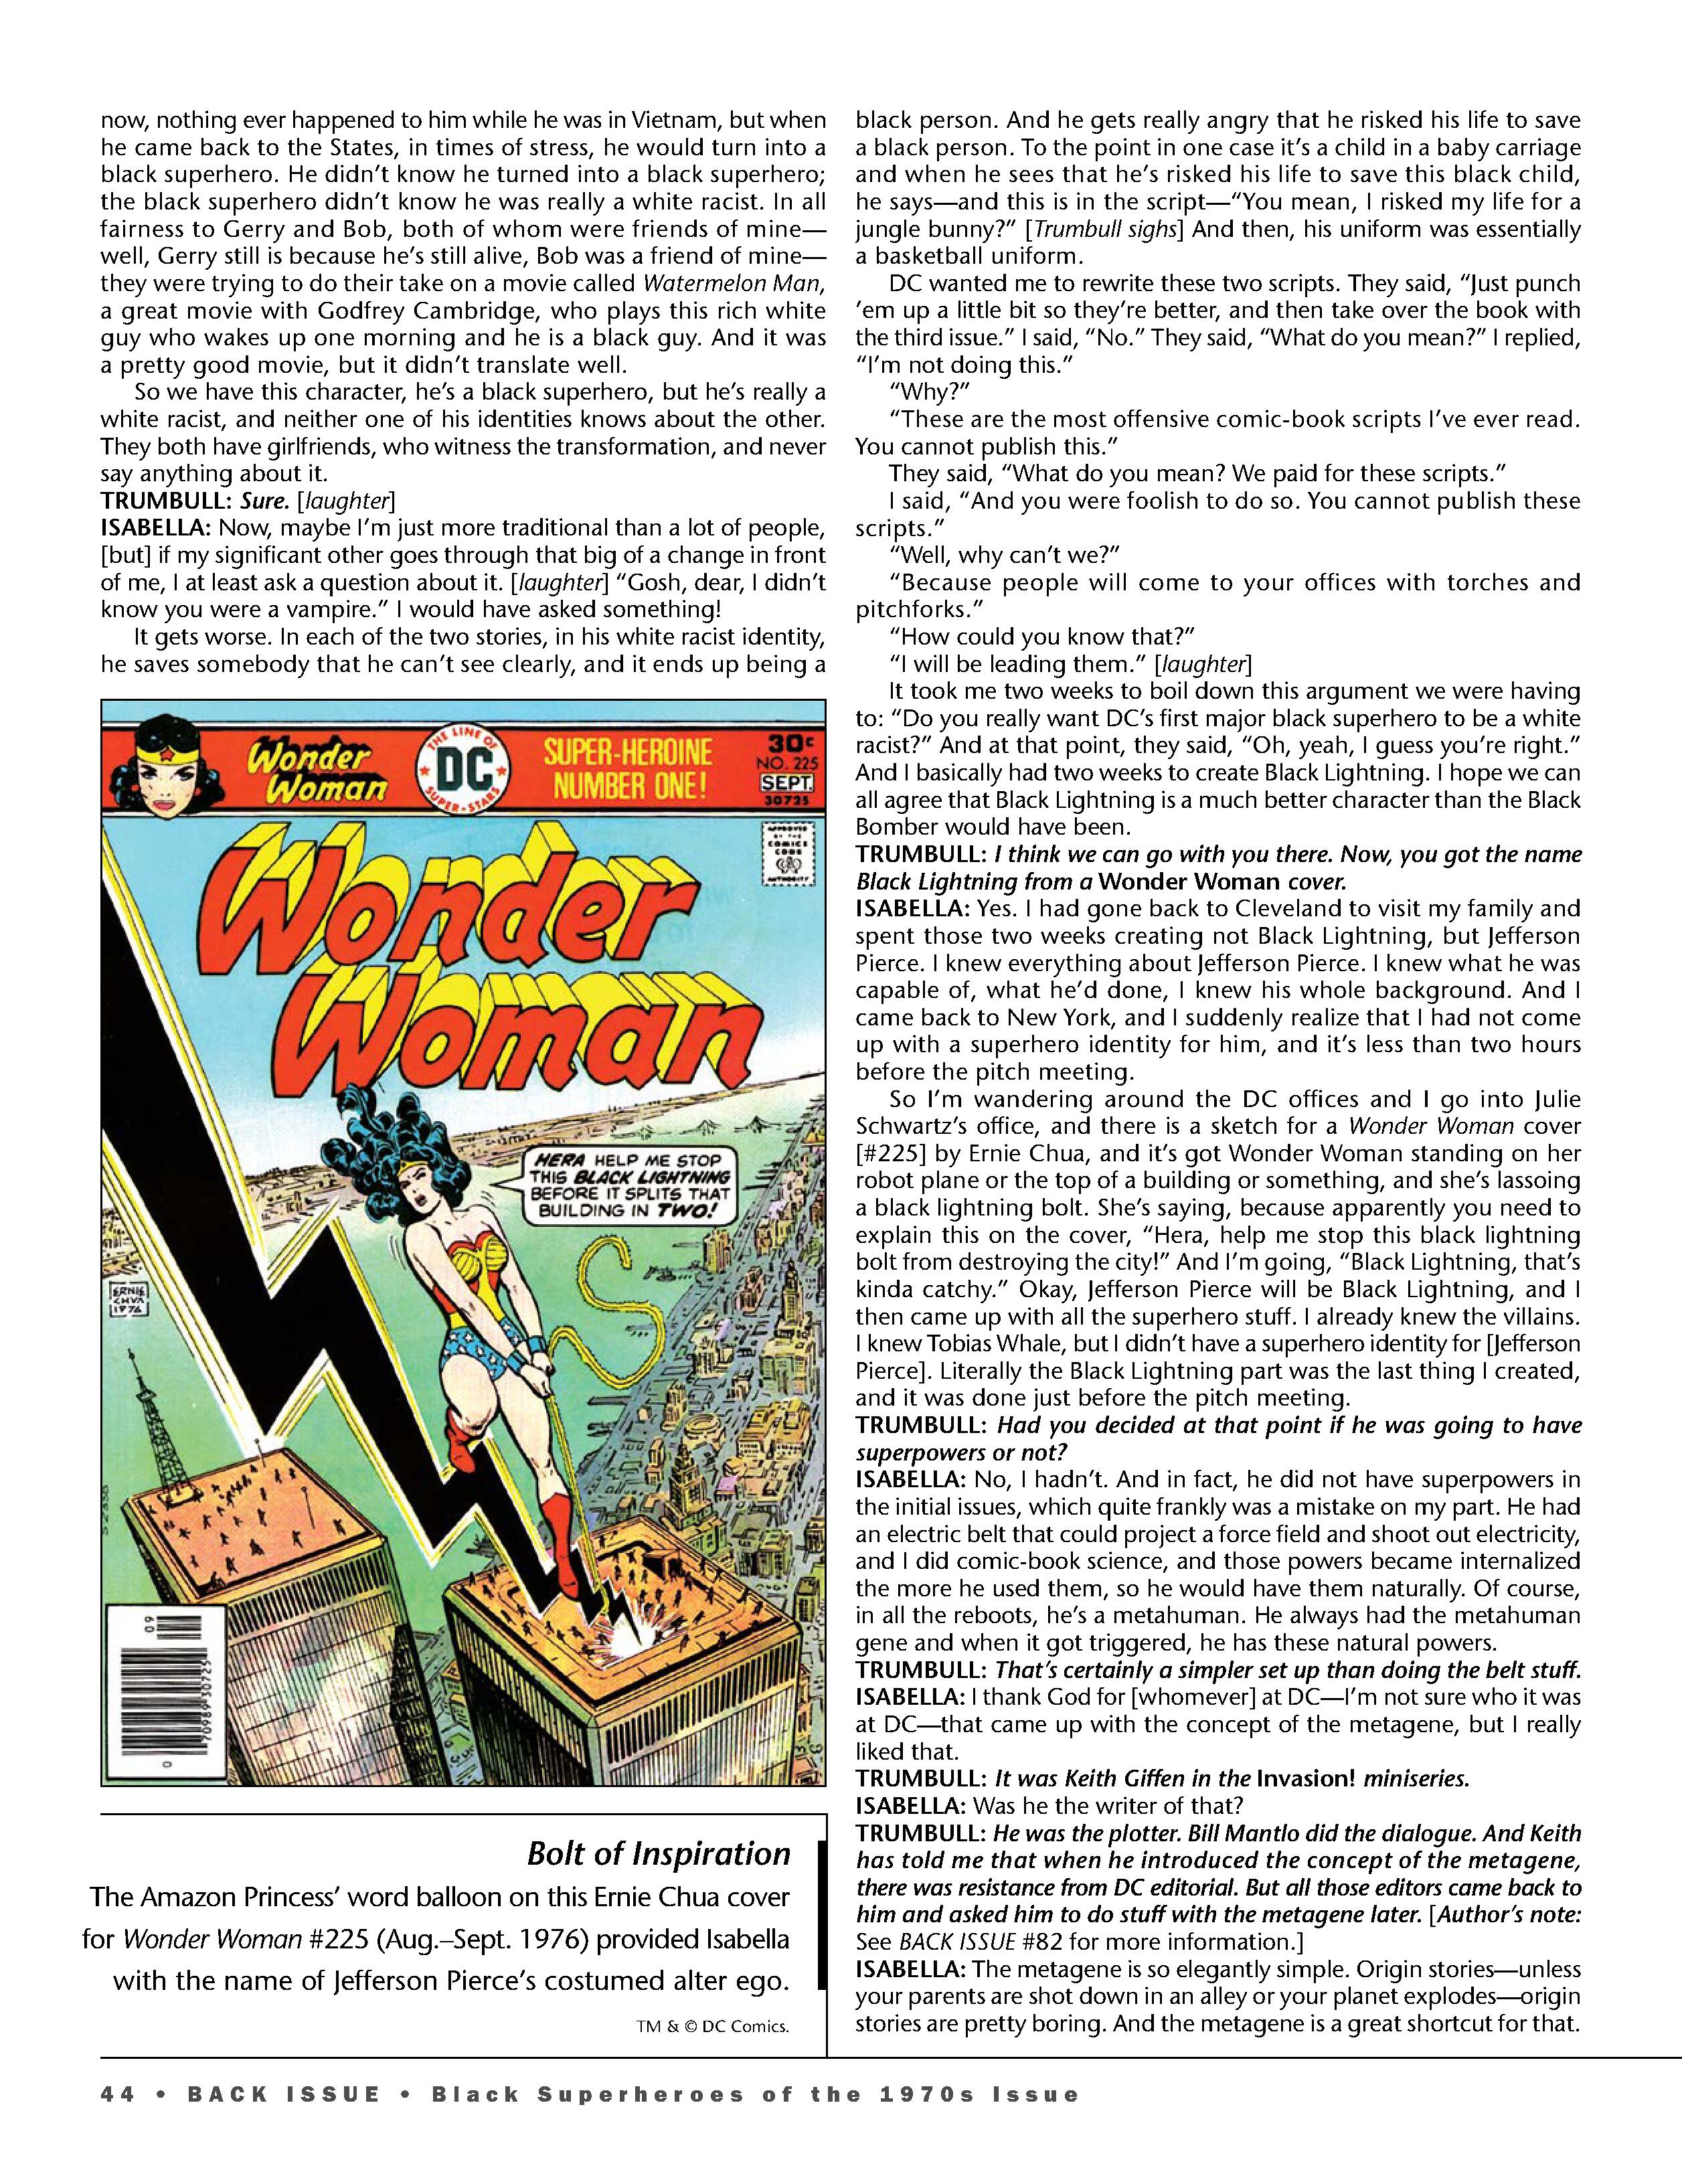 Read online Back Issue comic -  Issue #114 - 46